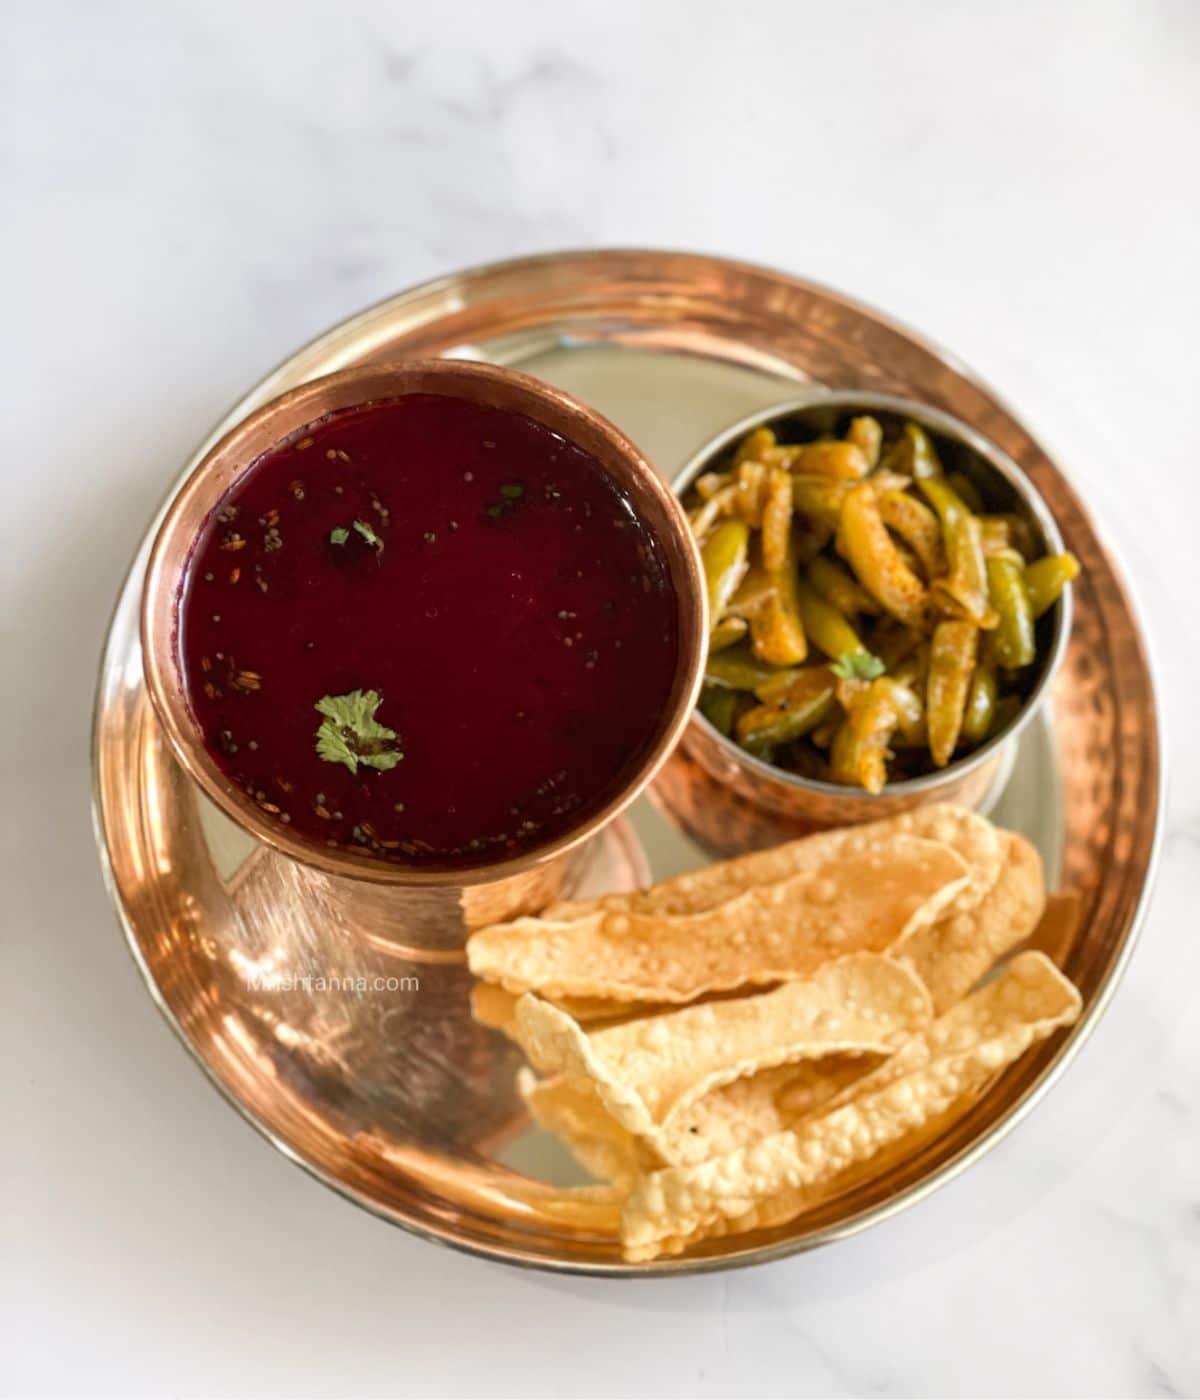 A copper glass is filled with beetroot rasam and placed on the silver plate with stir fry.